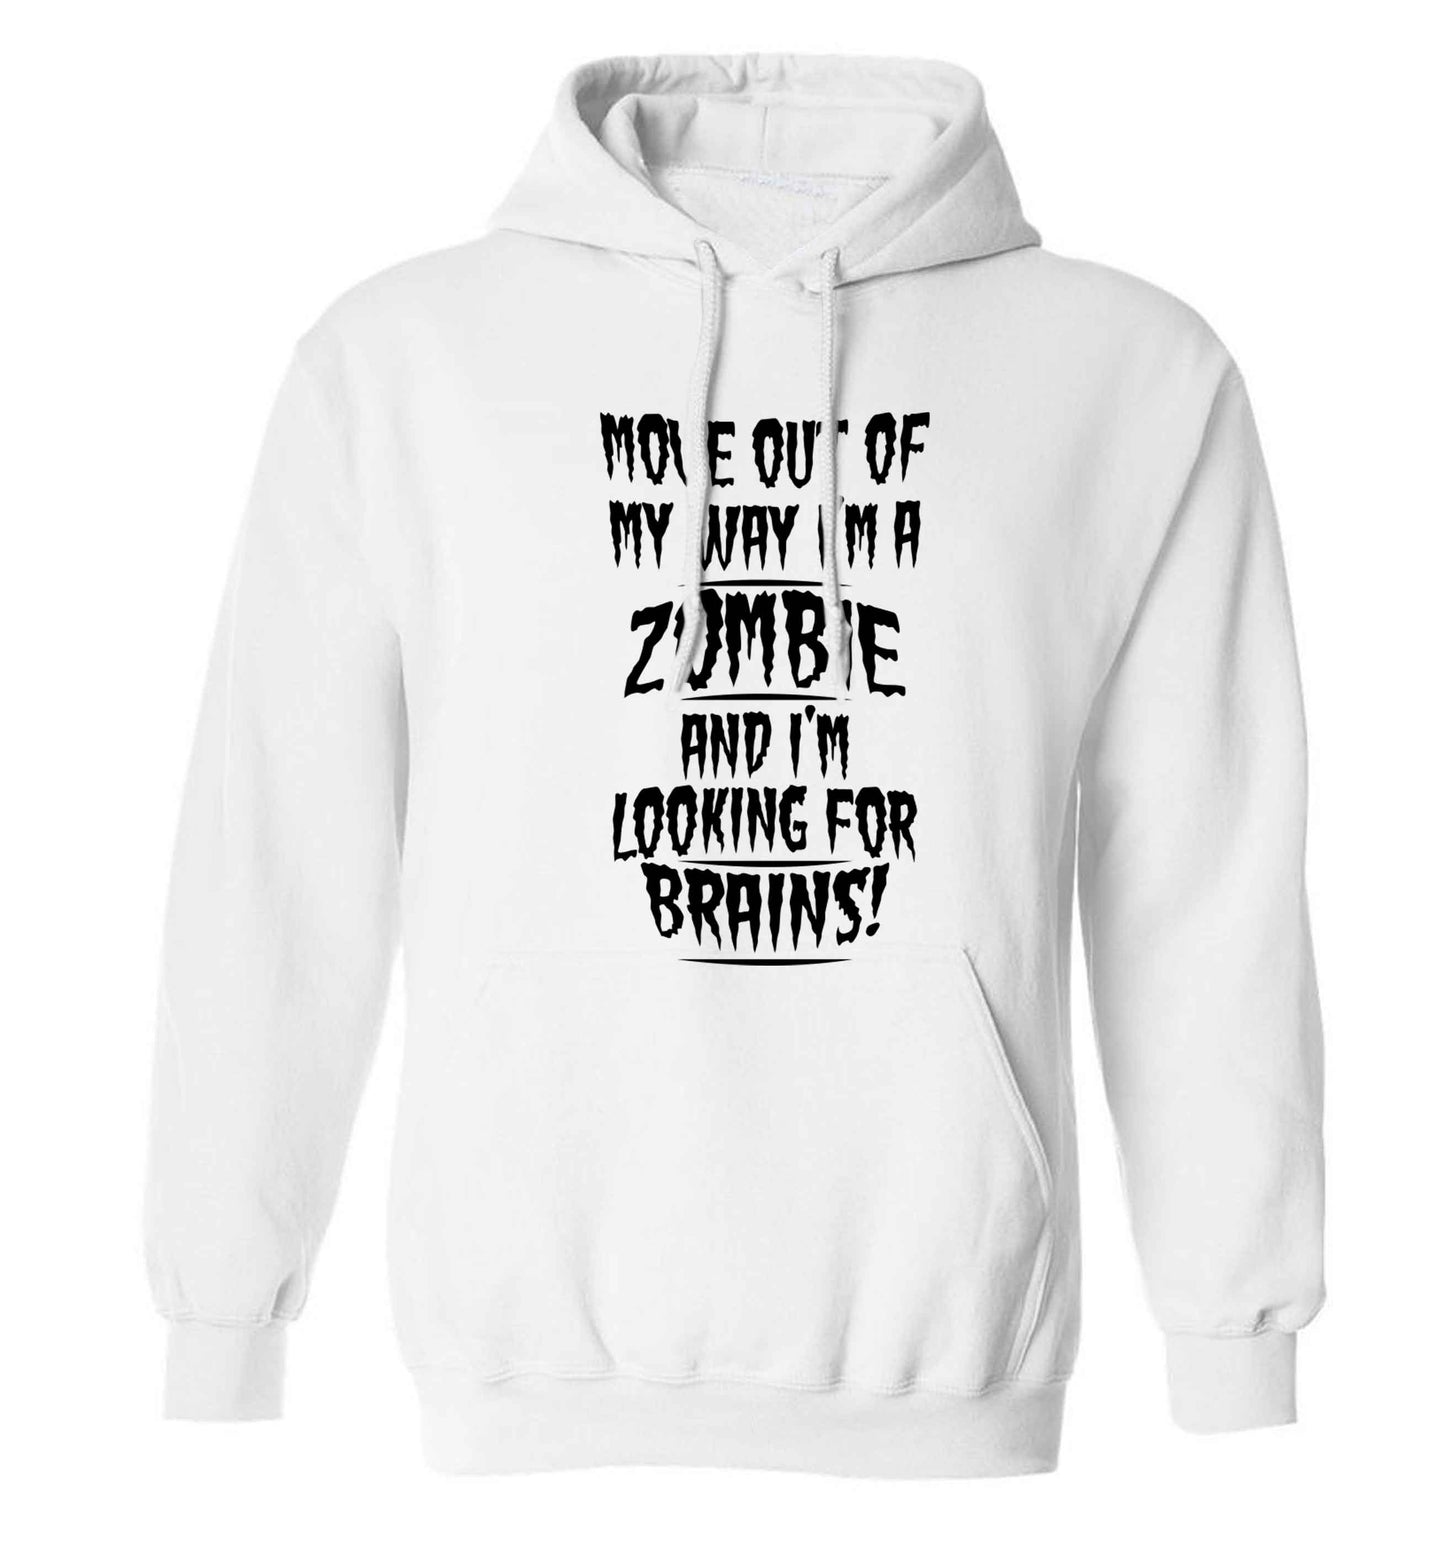 I'm a zombie and I'm looking for brains! adults unisex white hoodie 2XL